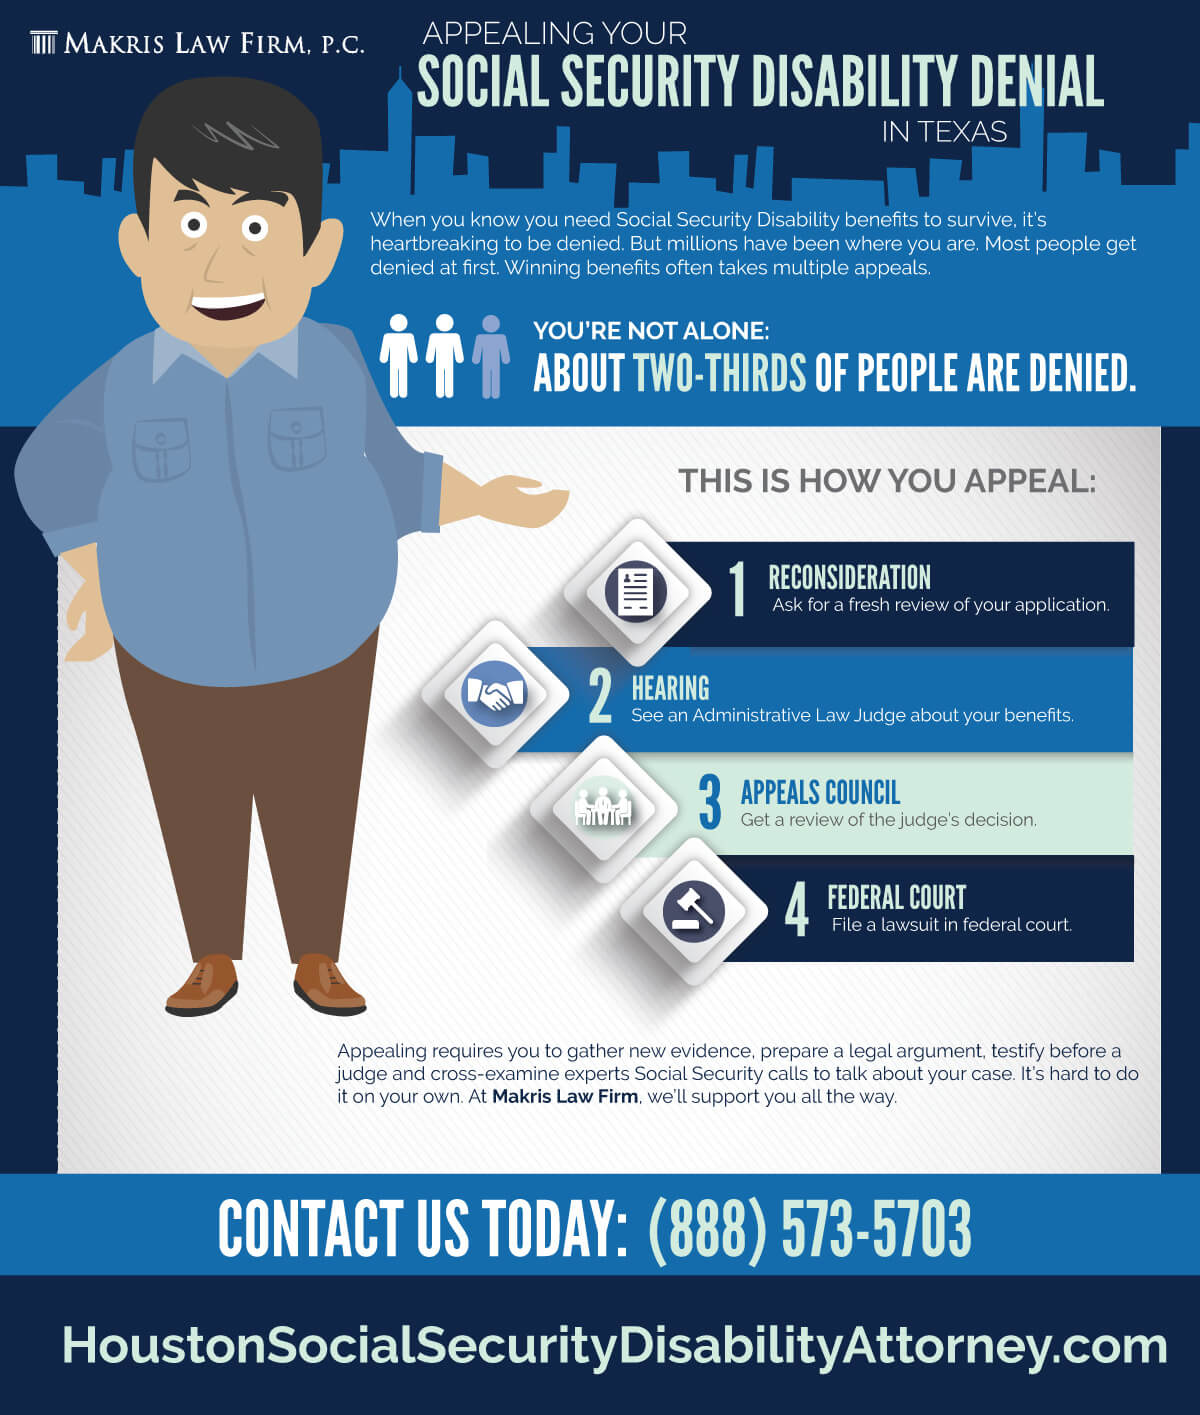 Appealing a Social Security Disability Denia Infographic